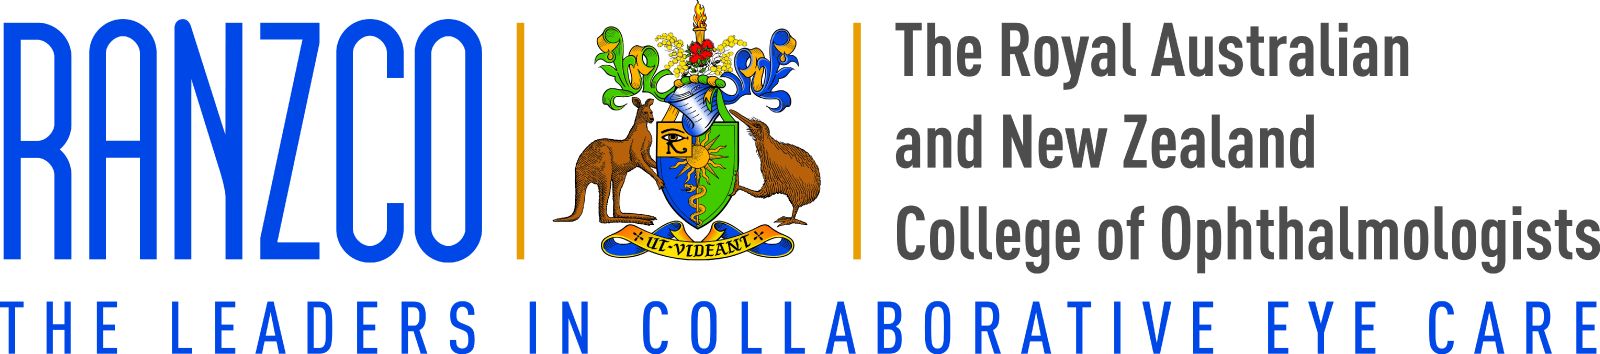 The Royal Australian and New Zealand College of Ophthalmologists logo